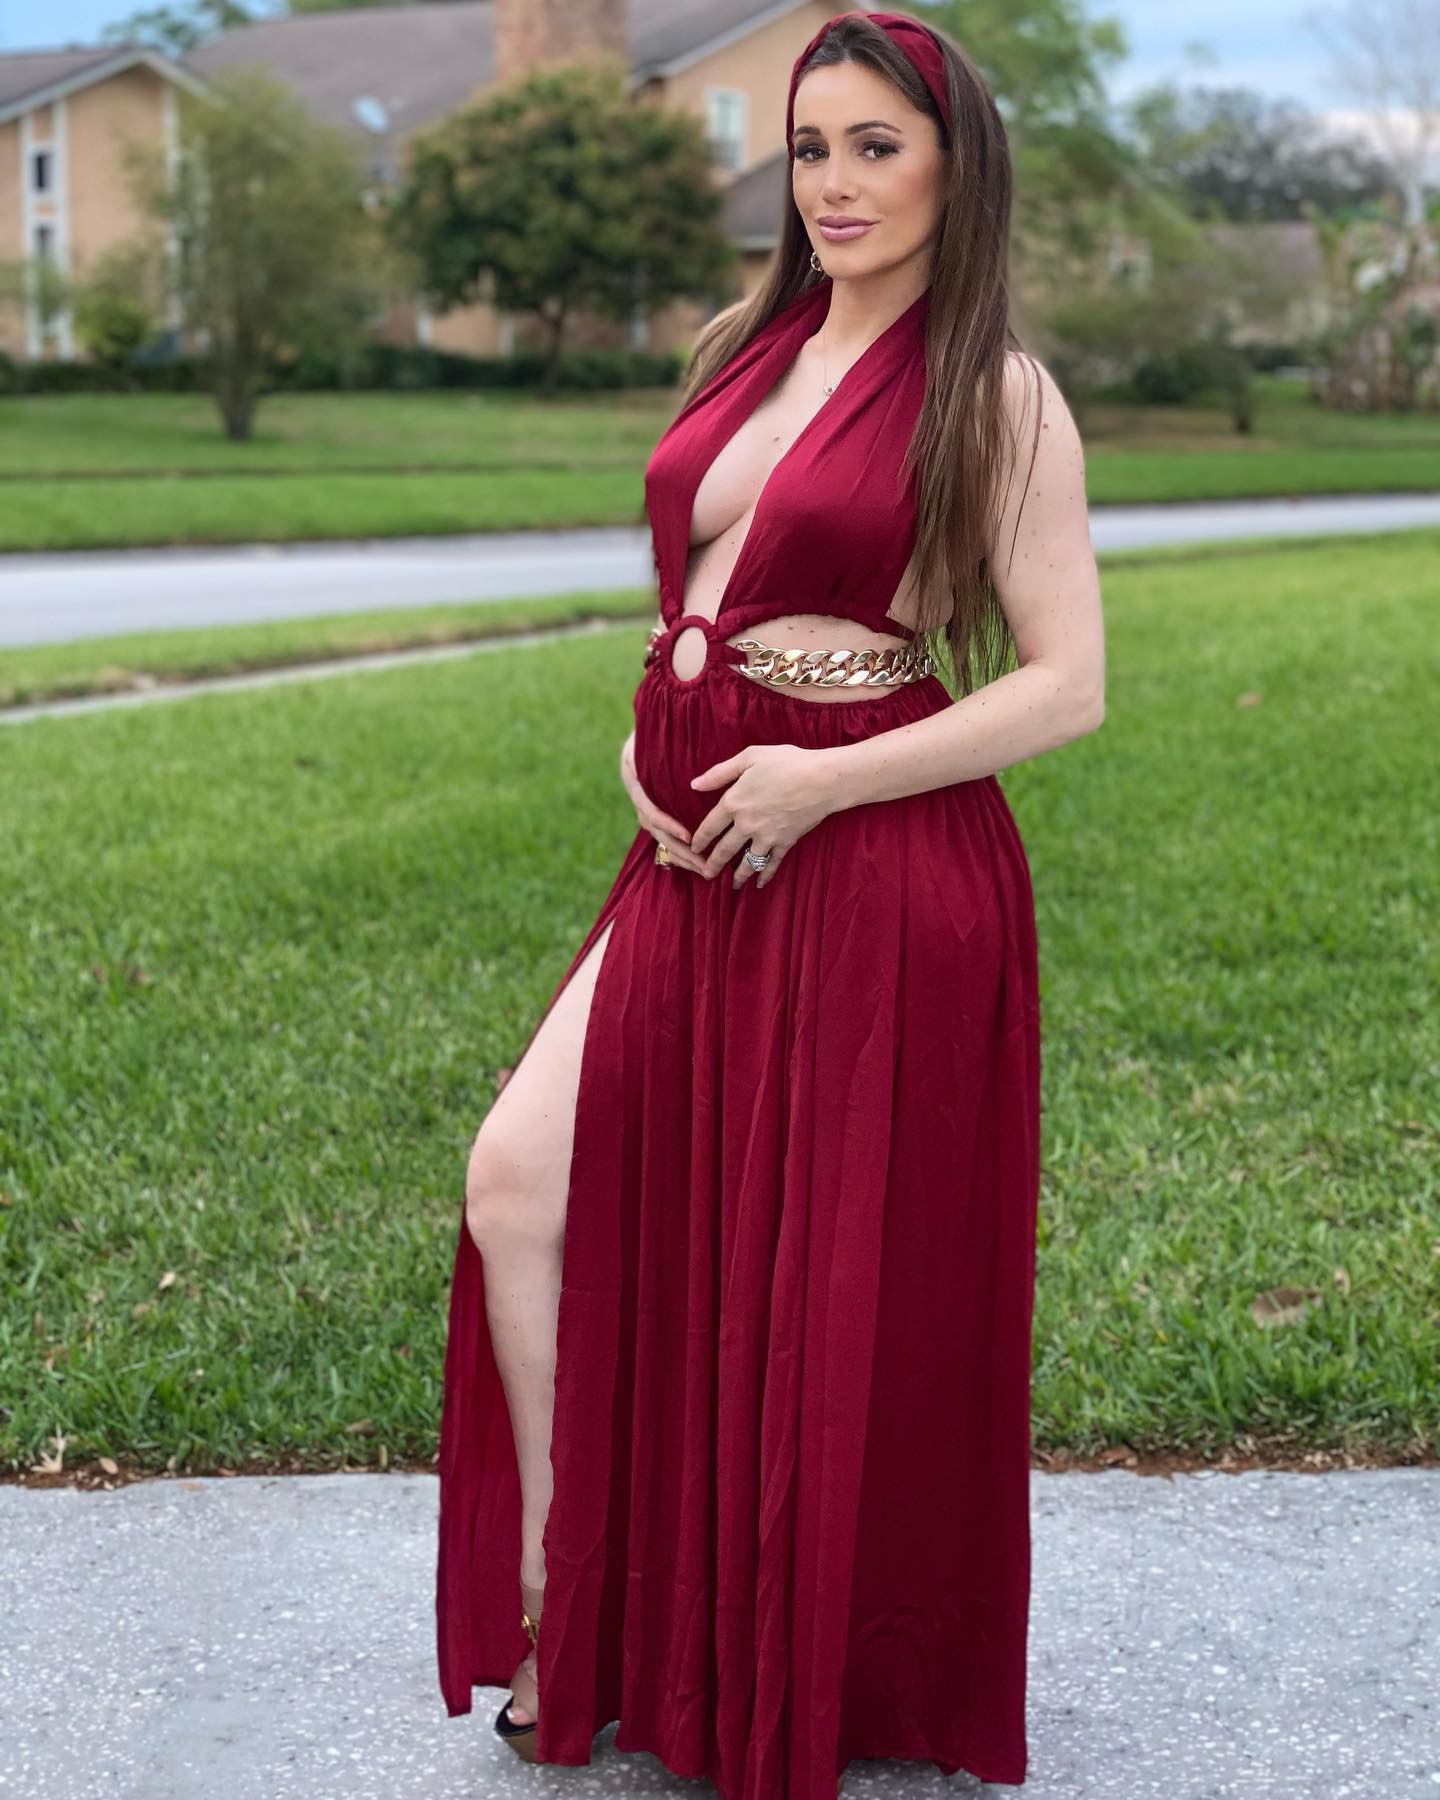 Pregnant Caroline de Campos Photoshoot in Red Outfit Design by SAMIYA, March 2022 2